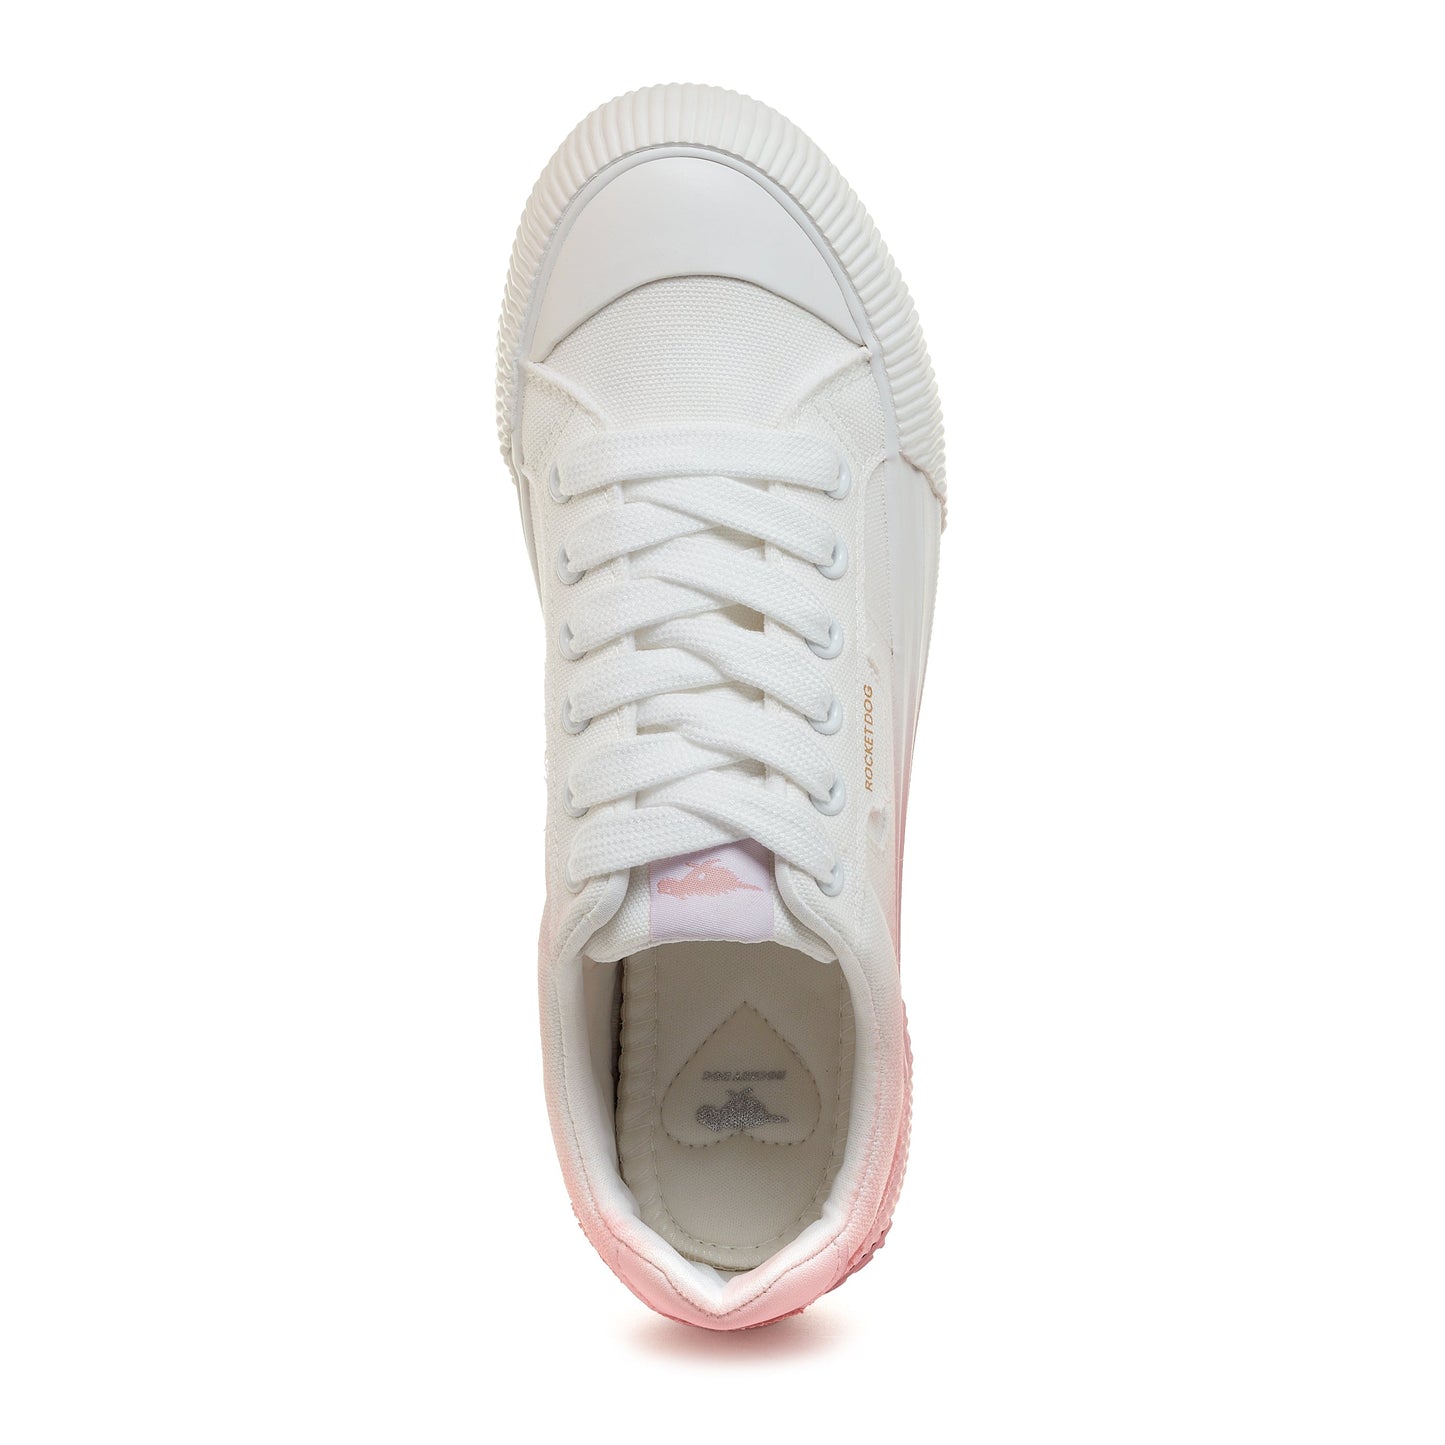 Cheery Light Pink Chunky Sole Trainers